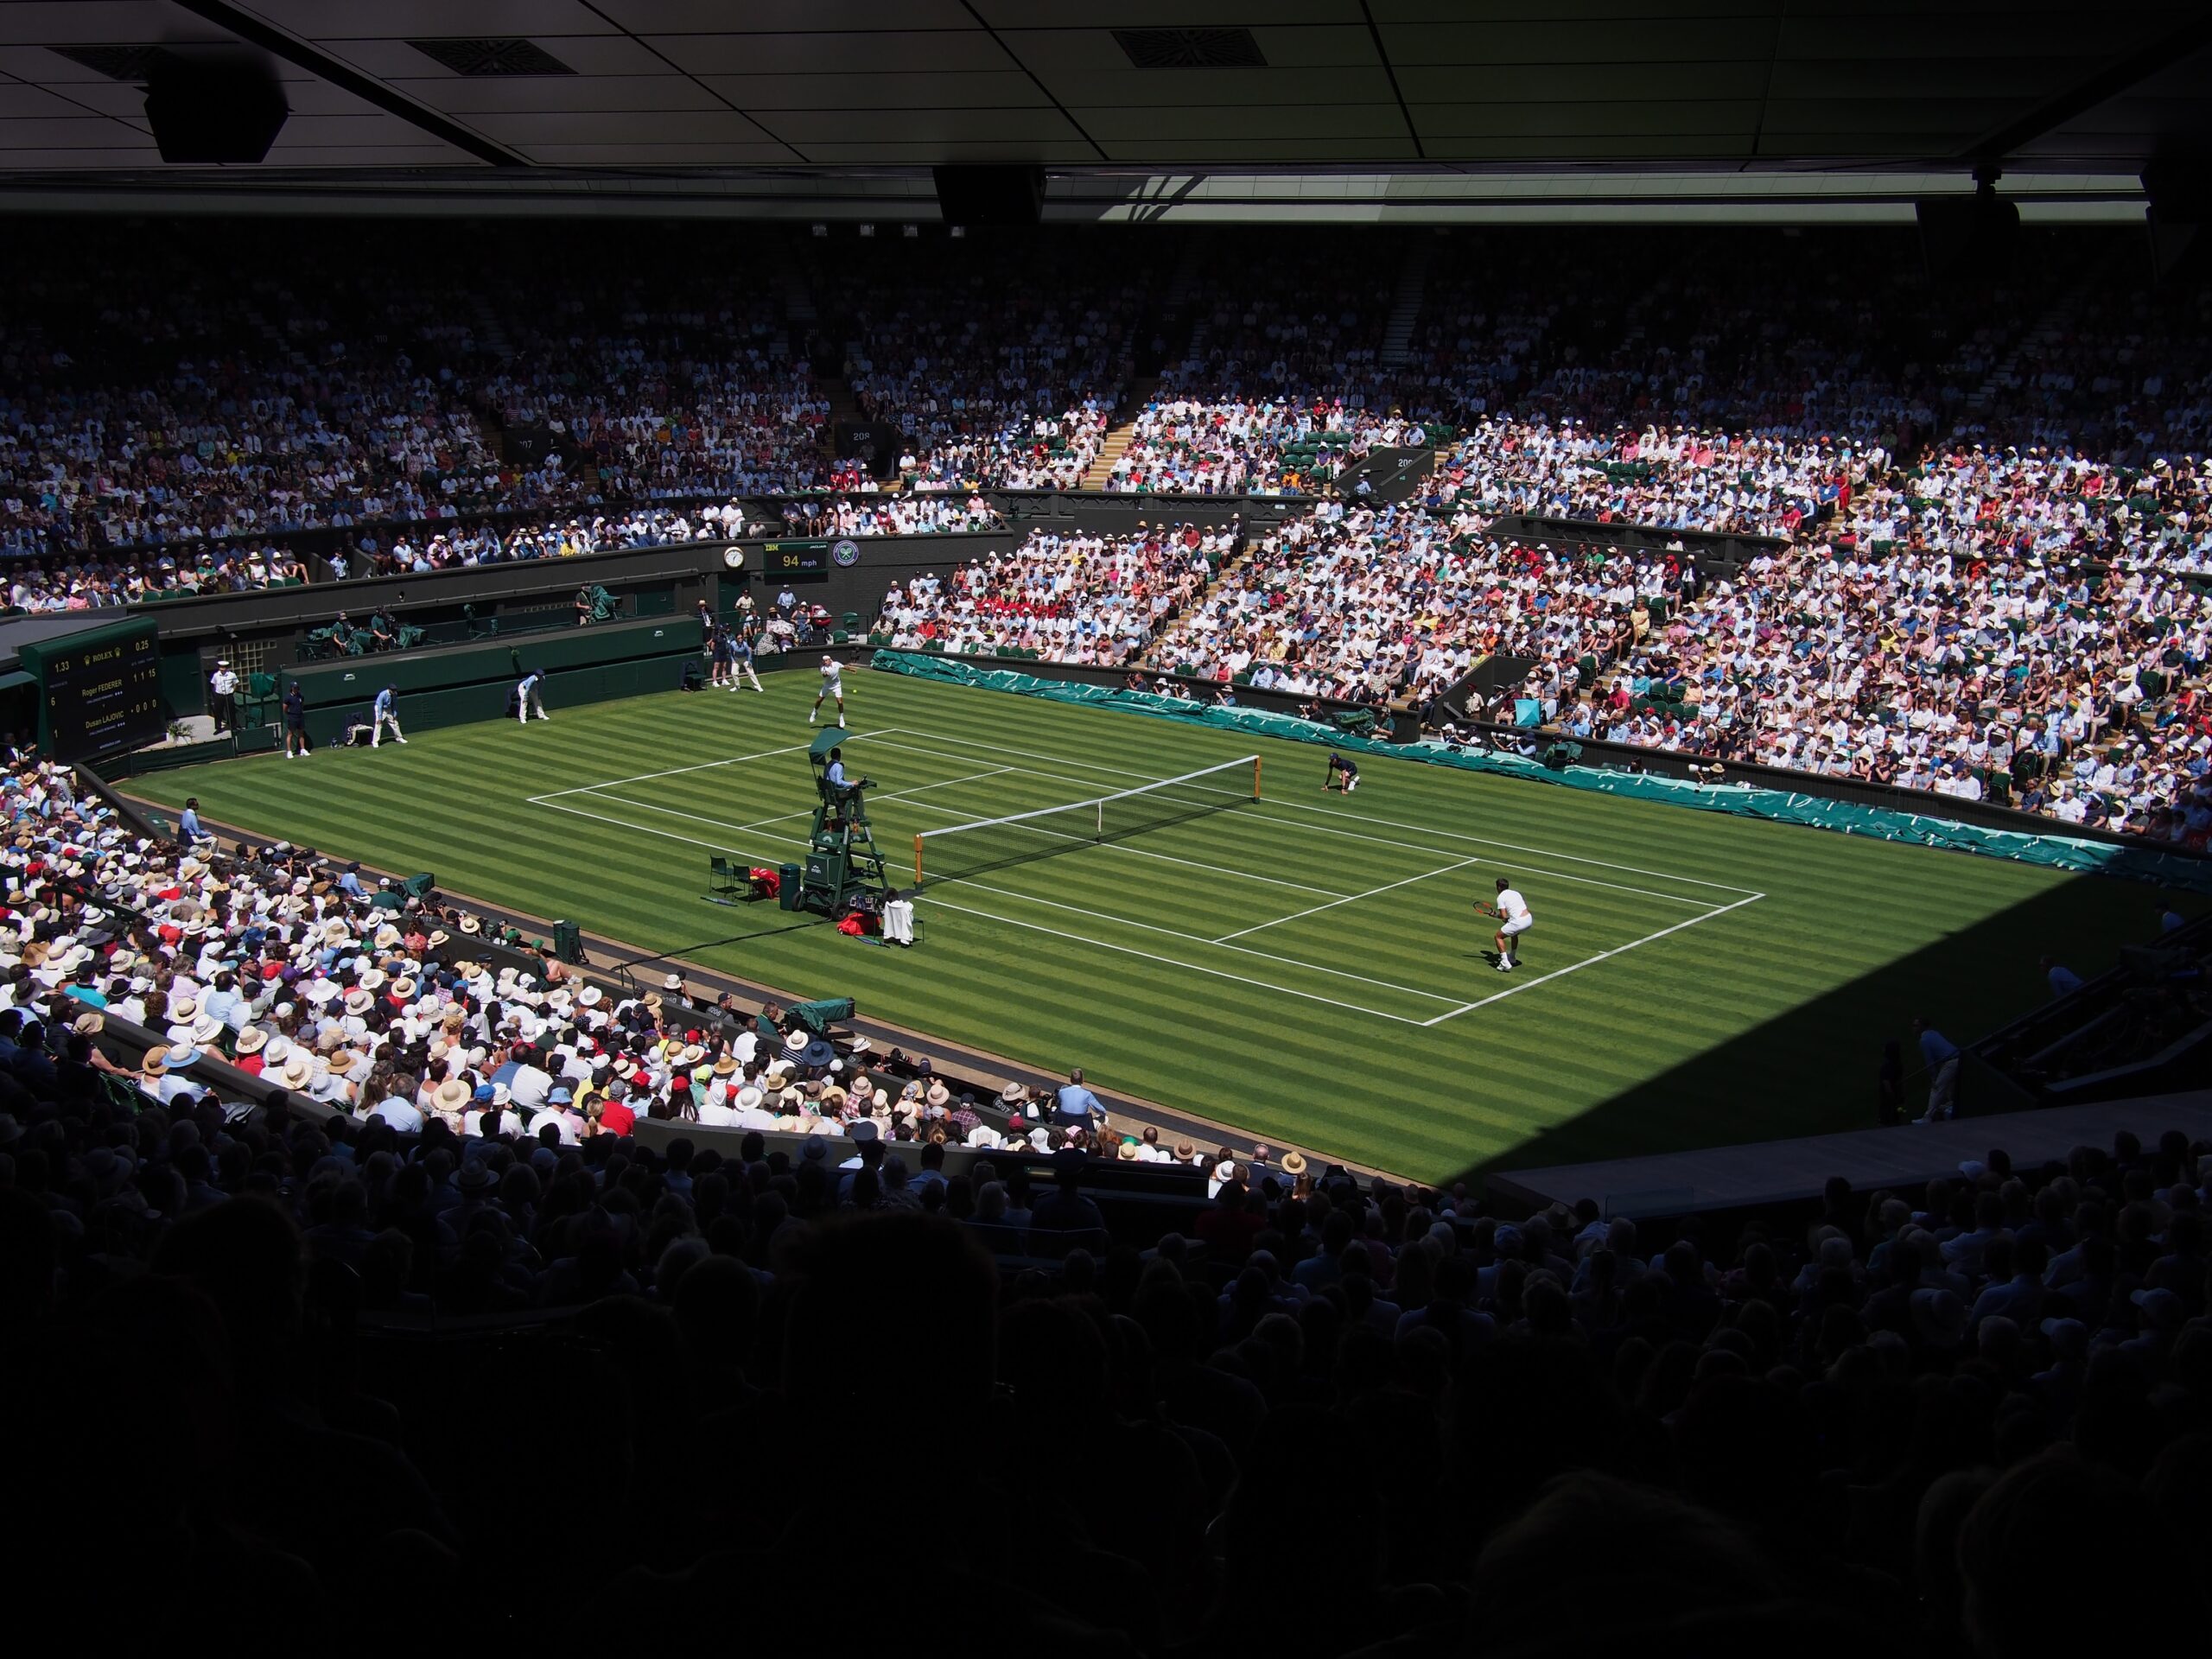 The Wimbledon draw results are out for the annual tournament in London.